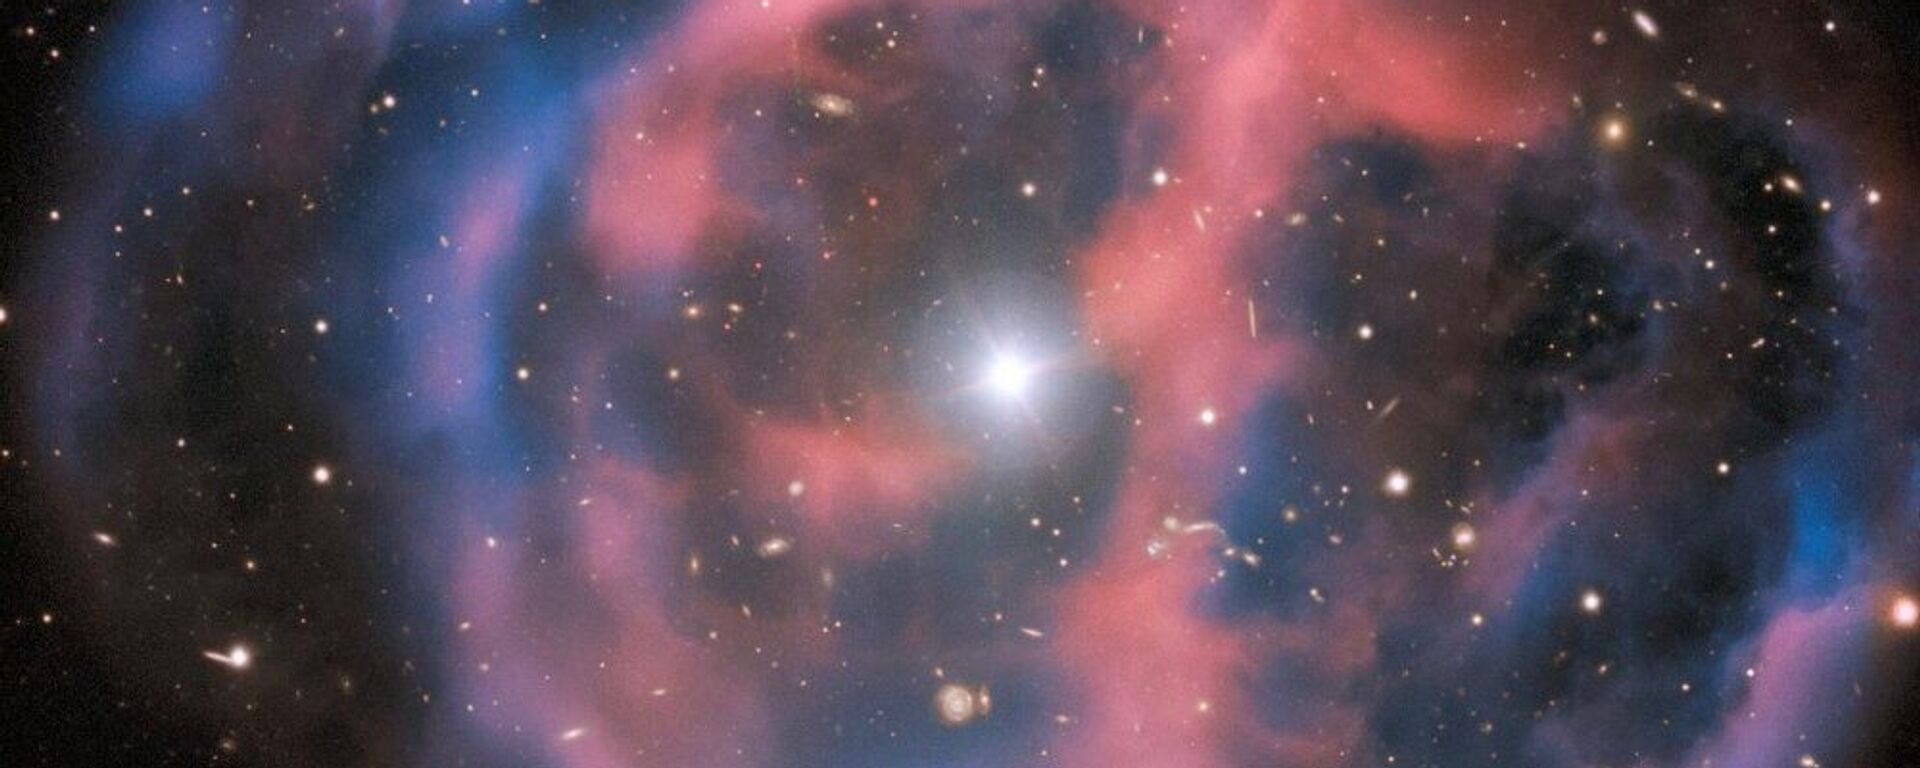 The nebula remains of a dead giant star surround the remaining subdwarf O star, another kind of hot subdwarf. - Sputnik International, 1920, 15.07.2022